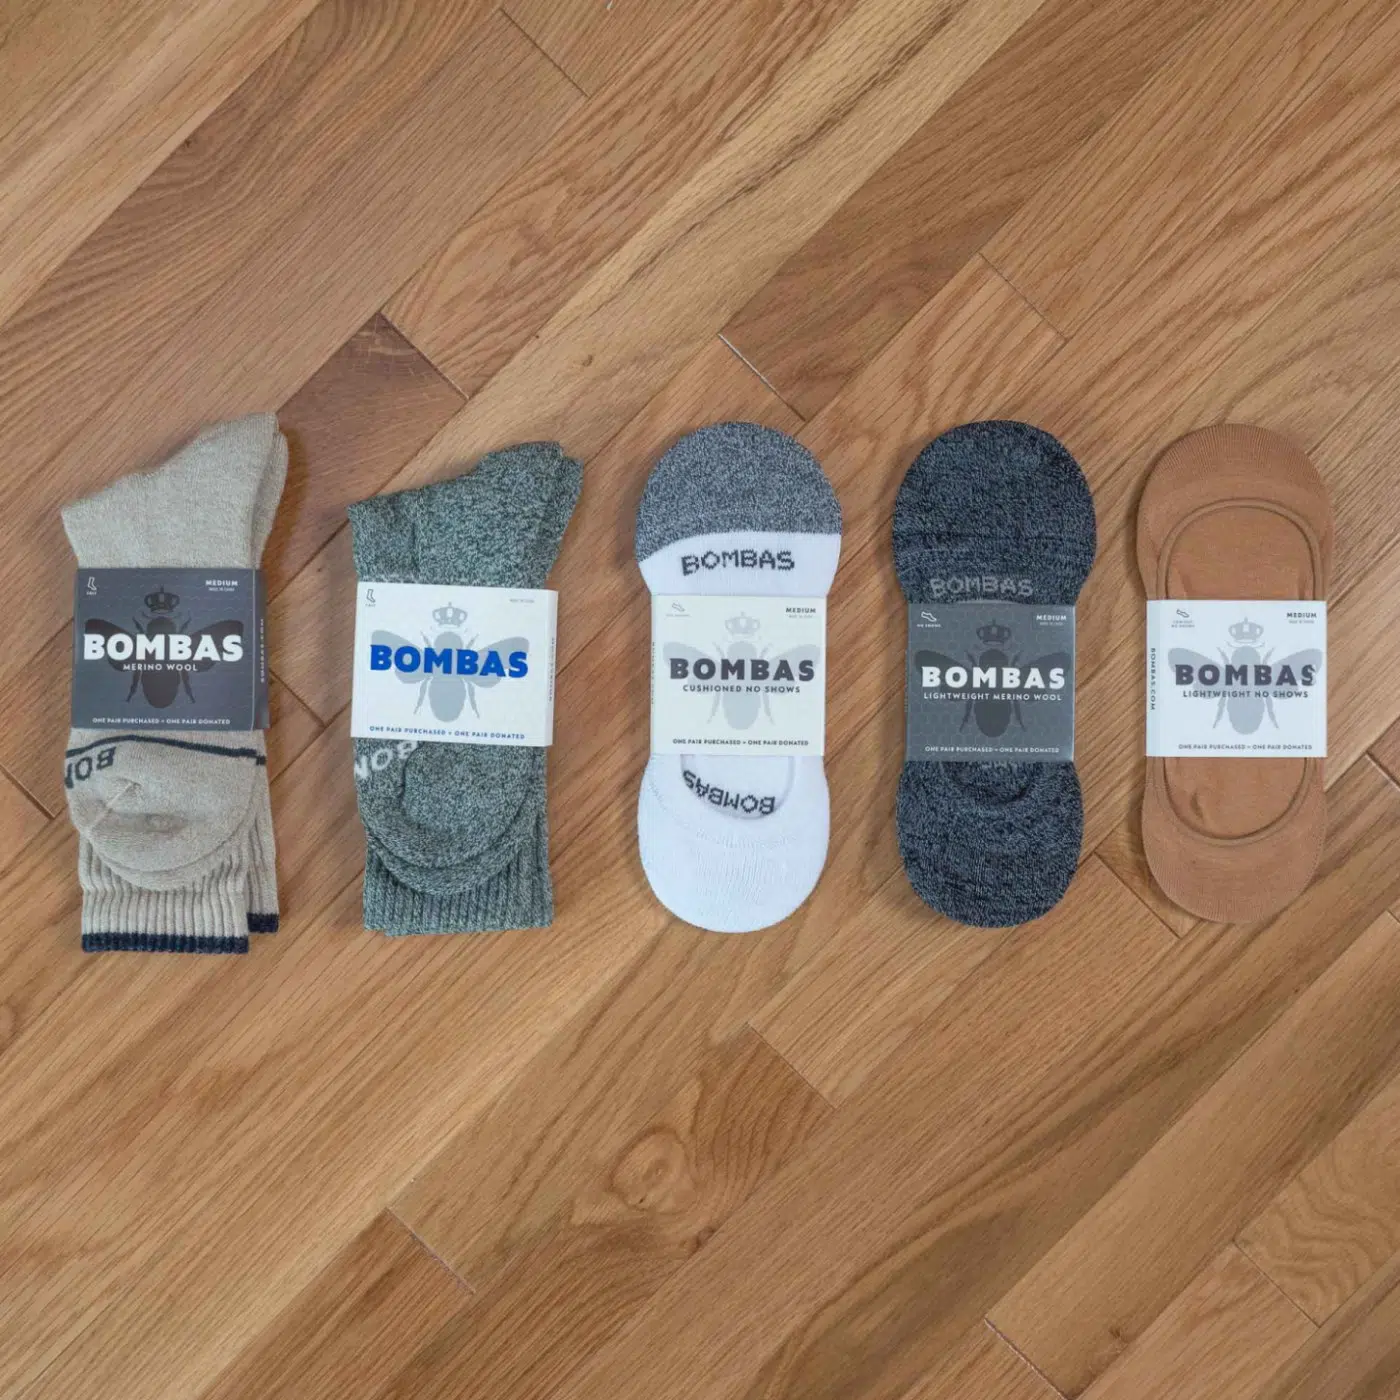 Bombas Review